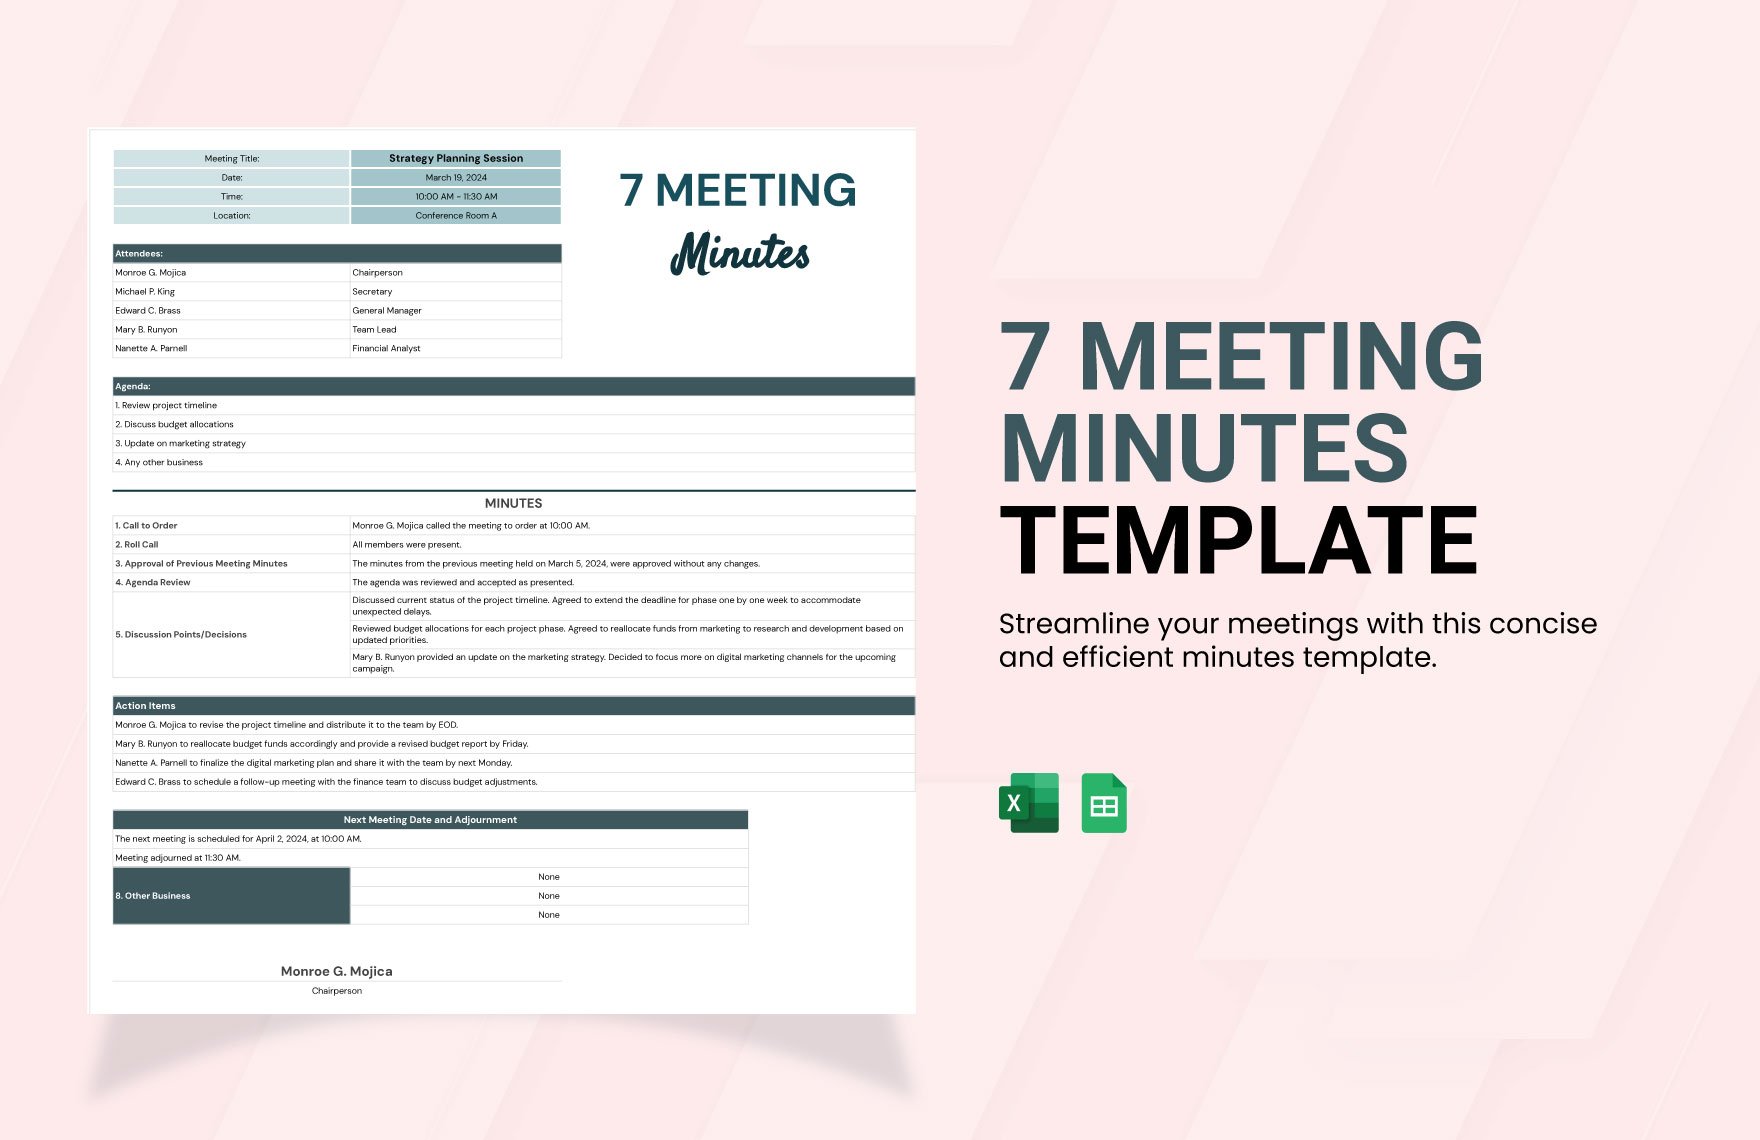 7 Meeting Minutes Template in Excel, Google Sheets